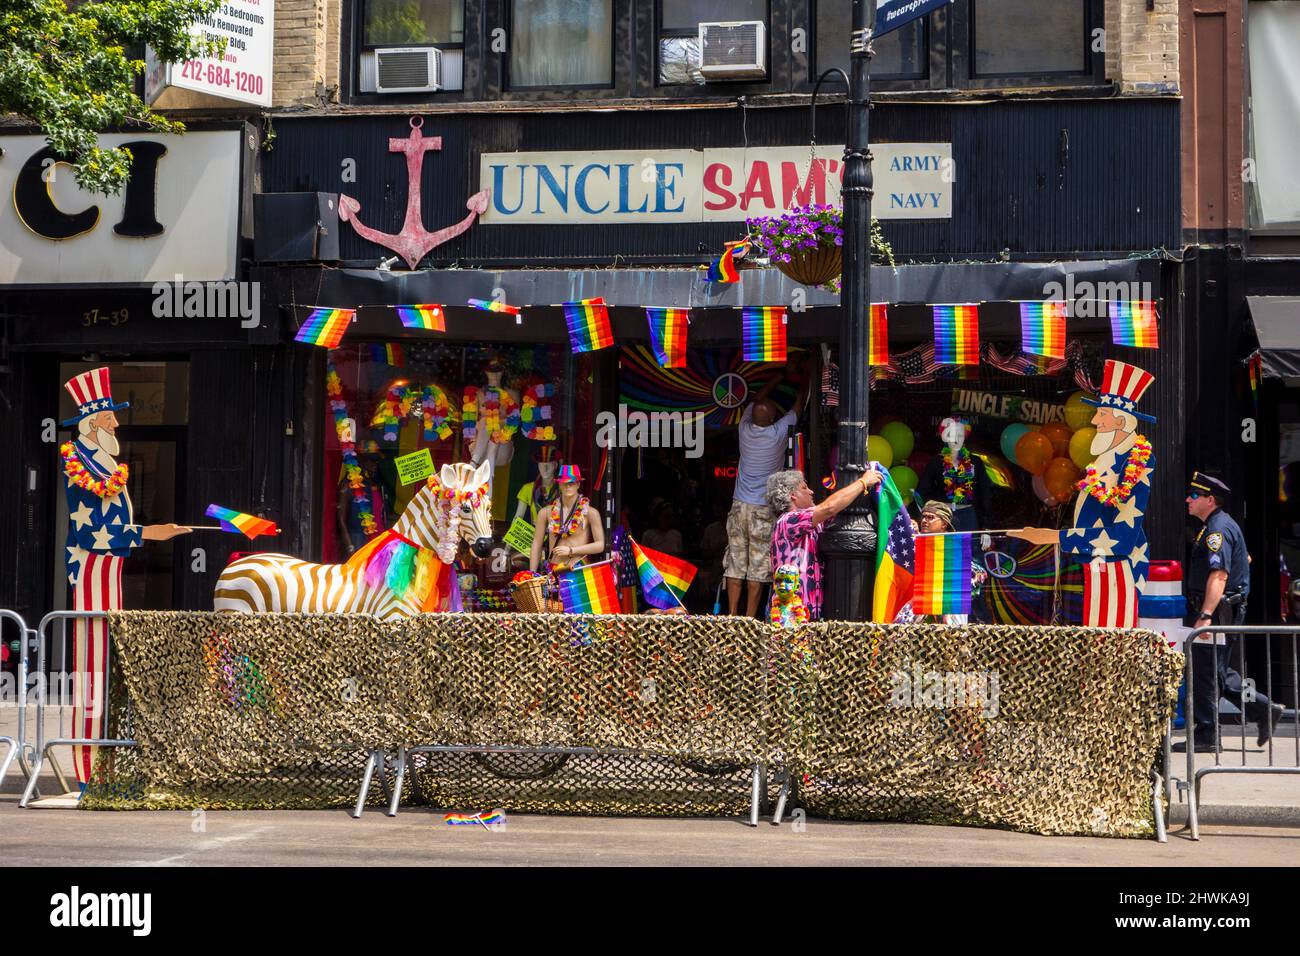 Uncle Sam Army Navy store on 8th Street during Gay Pride in  Greenwich Village, New York City, New York, USA Stock Photo